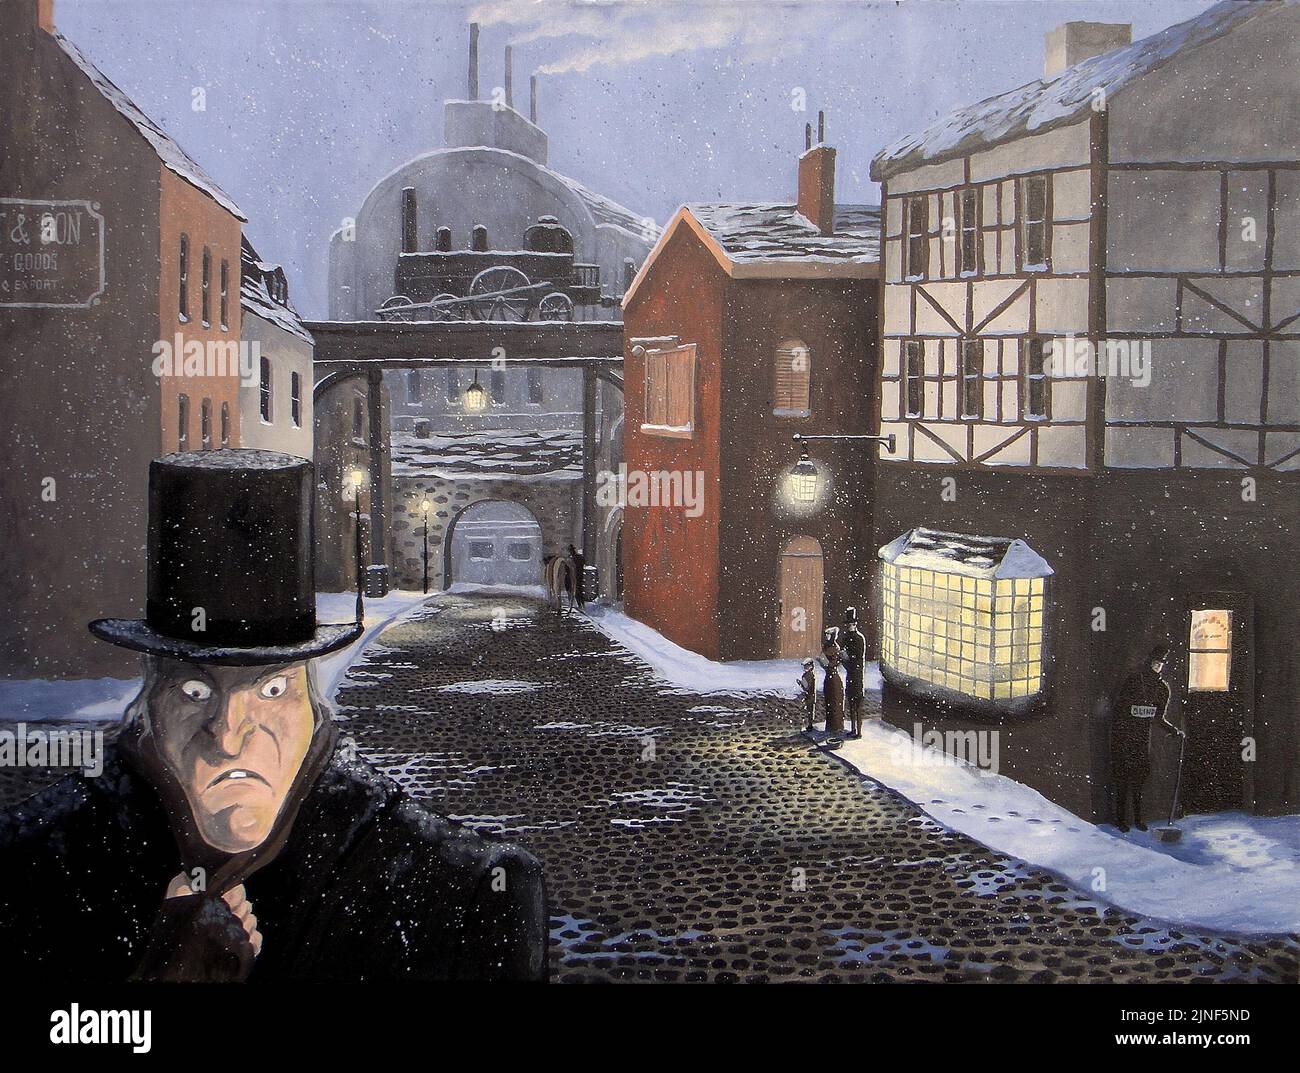 Ebenezer Scrooge walks the London streets, completely ignoring all signs of the upcoming Christmas holiday.  From Charles Dickens' Christmas Carol. Stock Photo